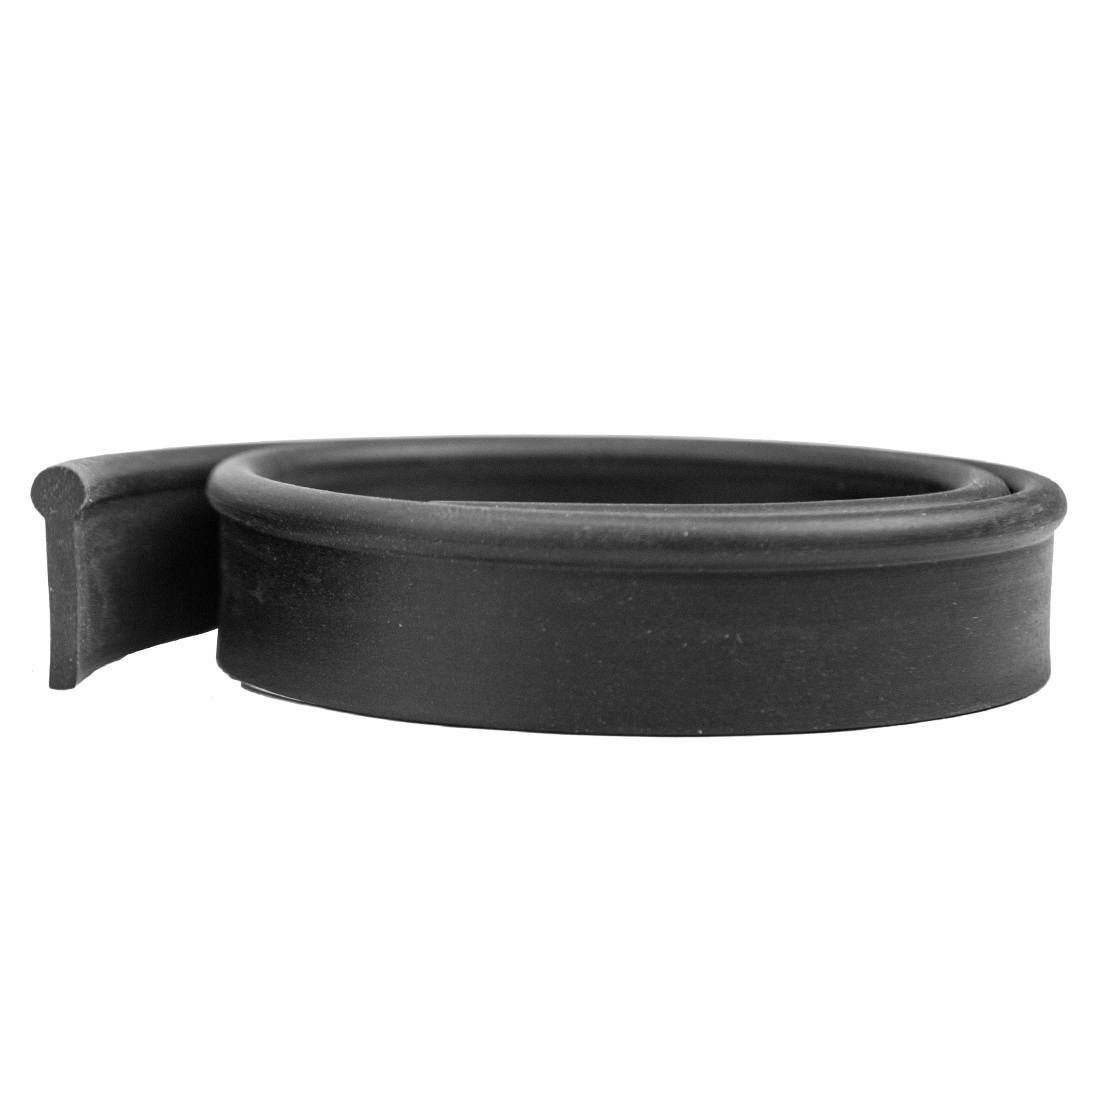 Pulex Soft Squeegee Rubber Front View